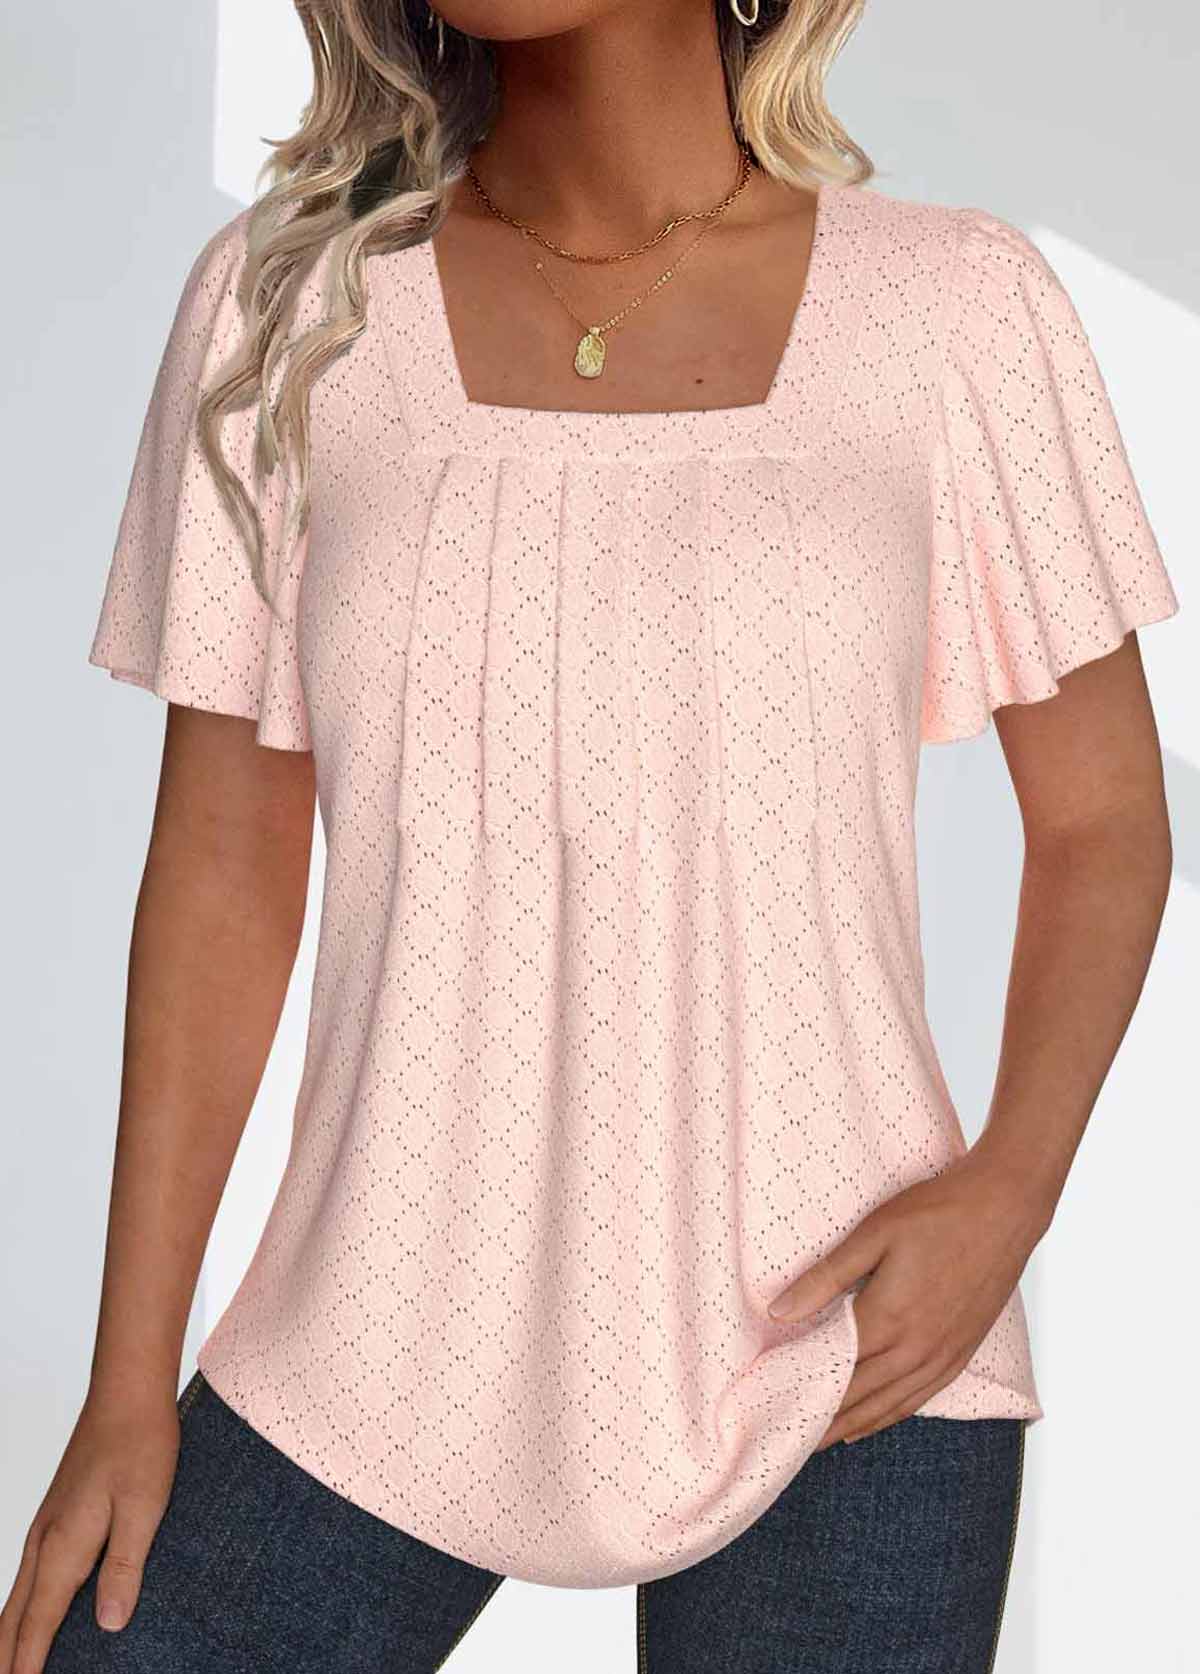 Plus Size Dusty Pink Textured Fabric T Shirt